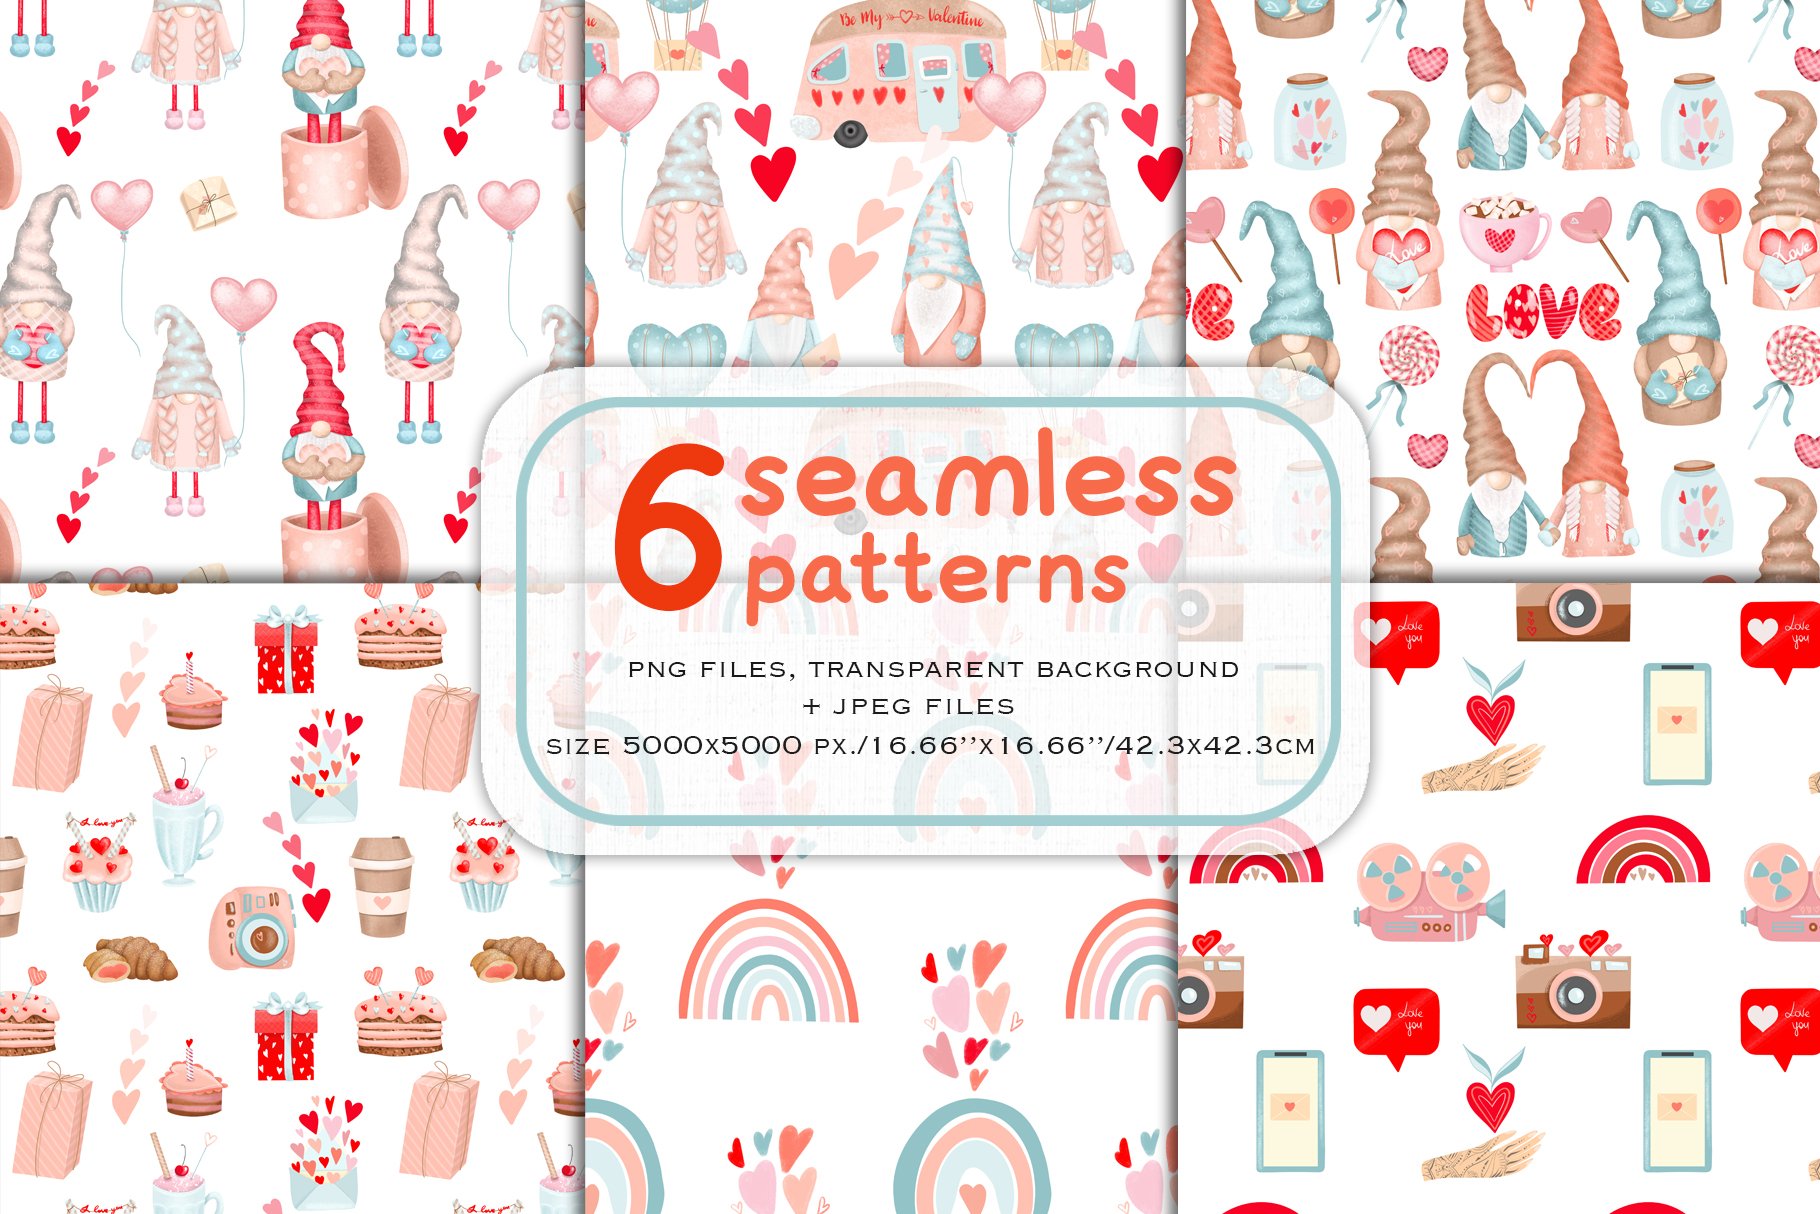 You will get 6 themed seamless patterns.